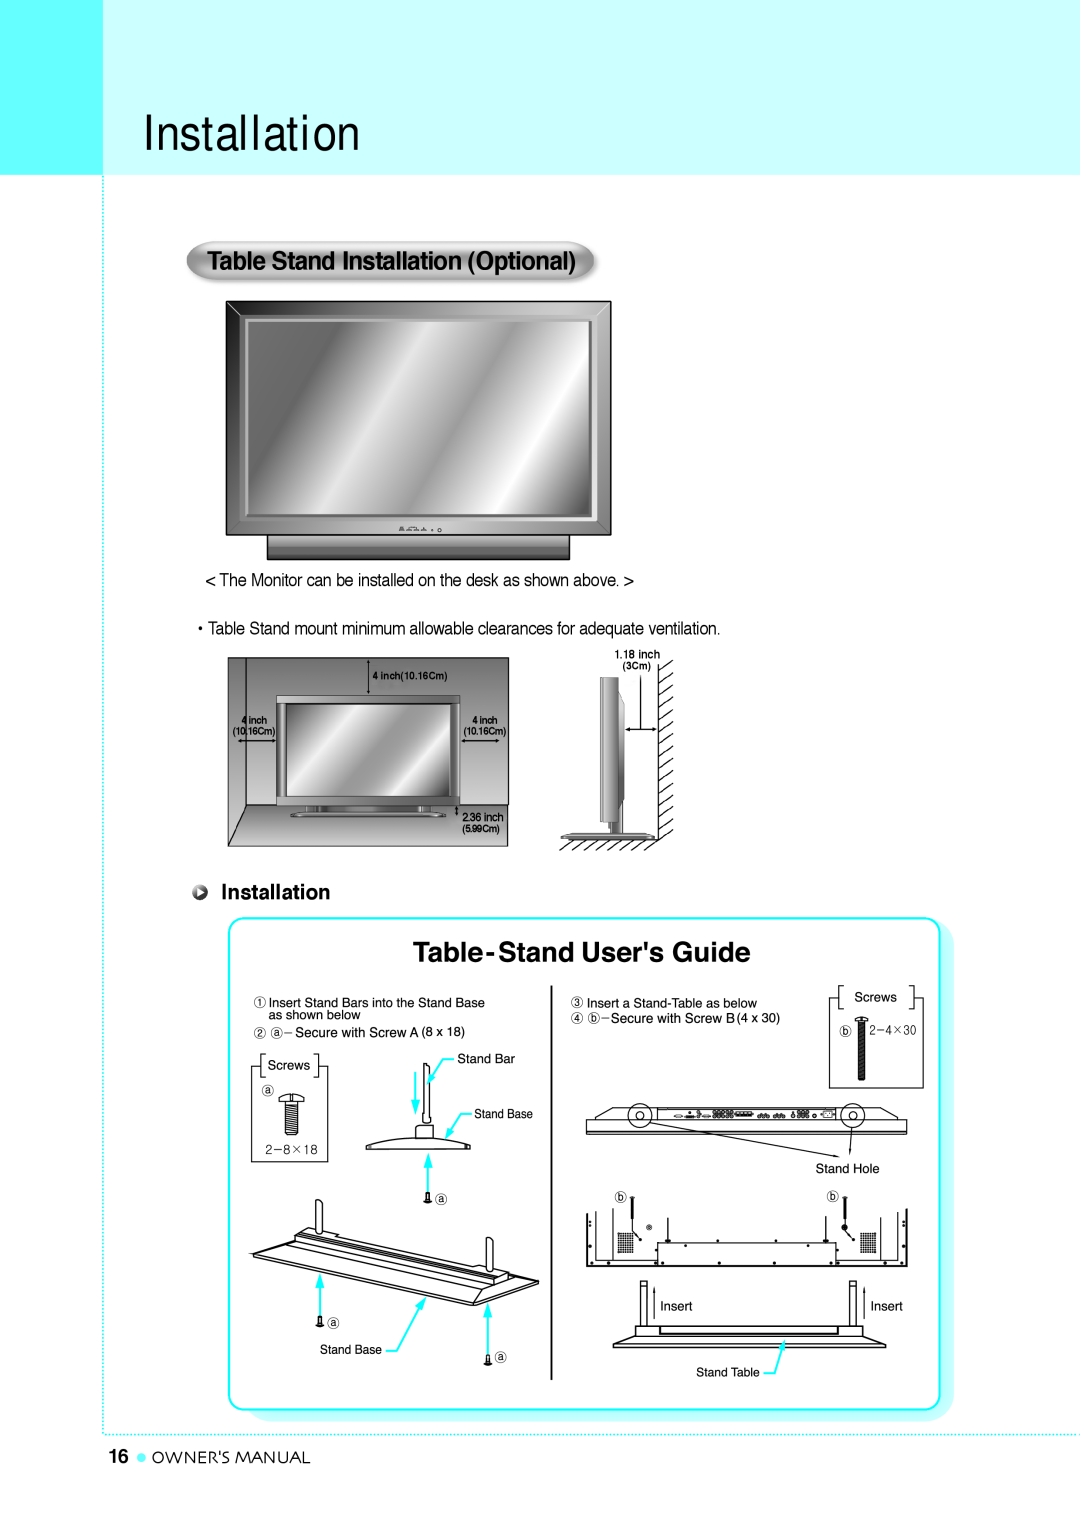 InFocus TD40 NTSC, TD32 manual Table Stand Installation Optional, Owners Manual, inch10.16Cm, 5.99Cm 